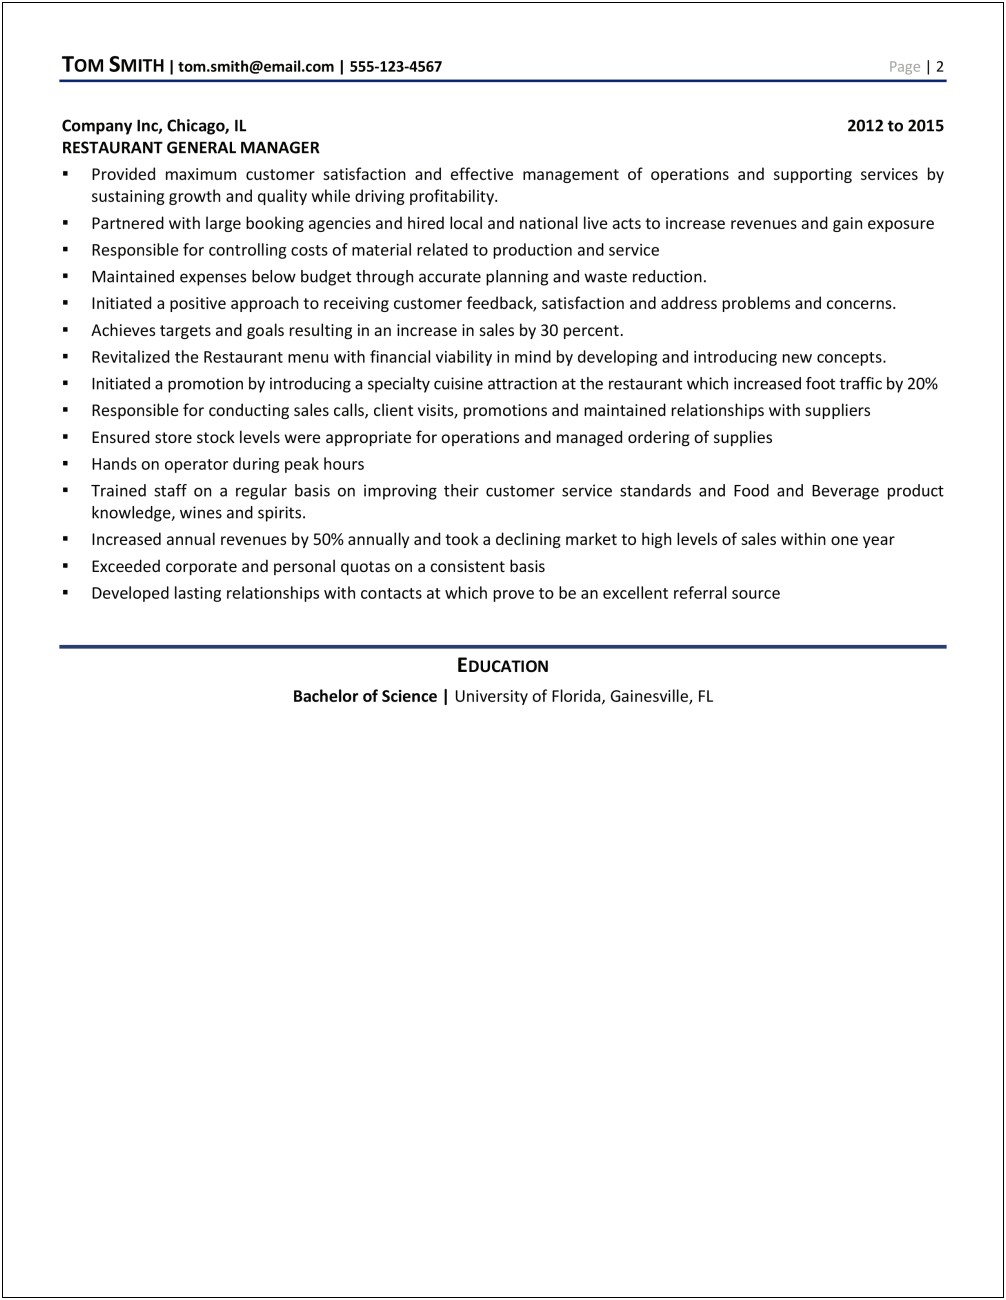 Resume Examples Restaurant General Manager